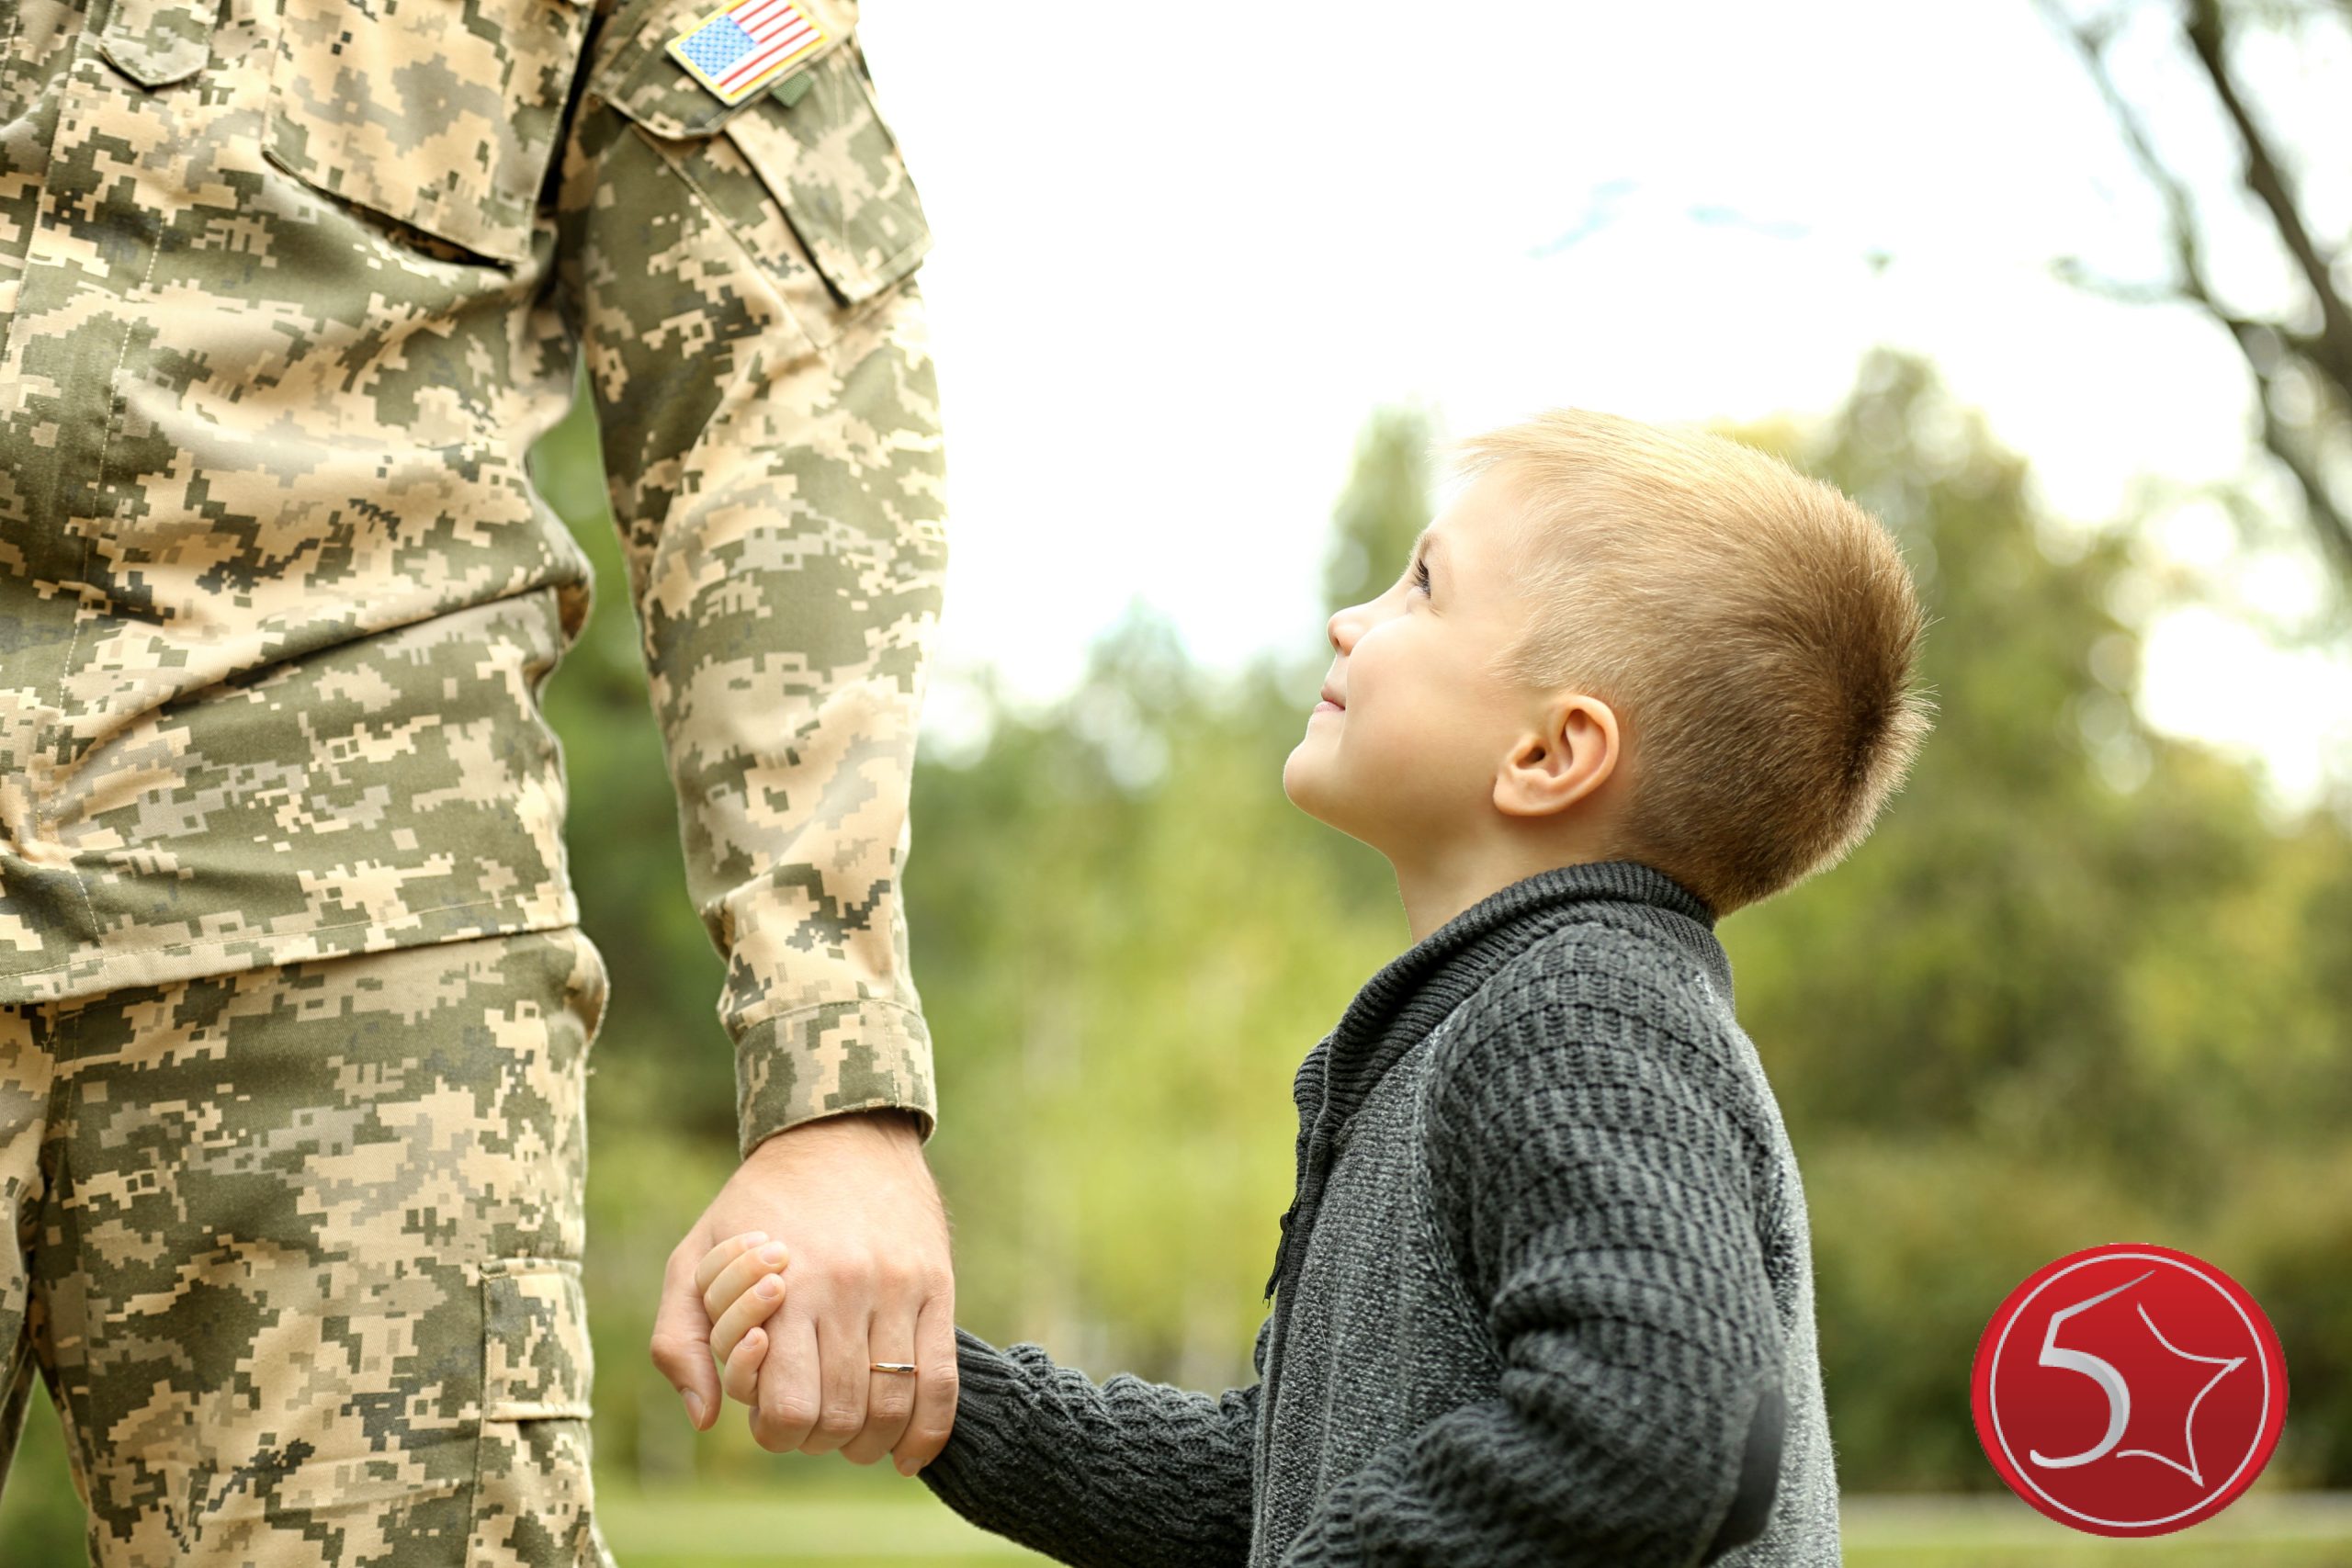 Honoring Our Heroes: 5-Star Auto Plaza’s Military Auto Loans in St. Charles